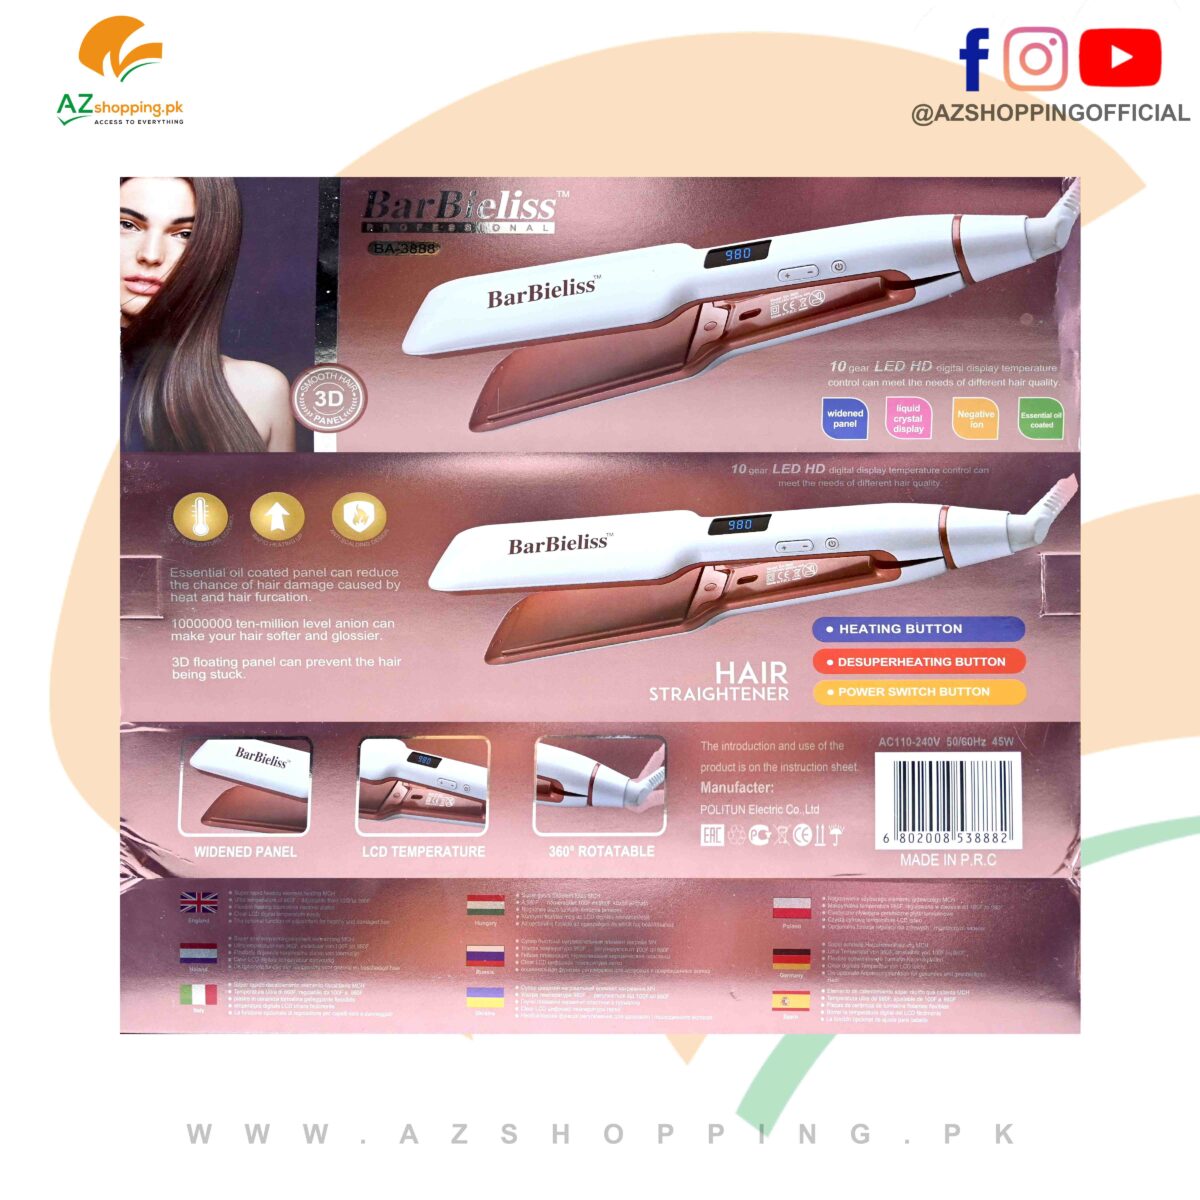 Barbeliss Professional Hair Straightener Flat Iron with Widened Panel, LCD Display Adjustable Temperature, 360 Degree Rotatable, 3D Floating Panel - Model: BA-3888